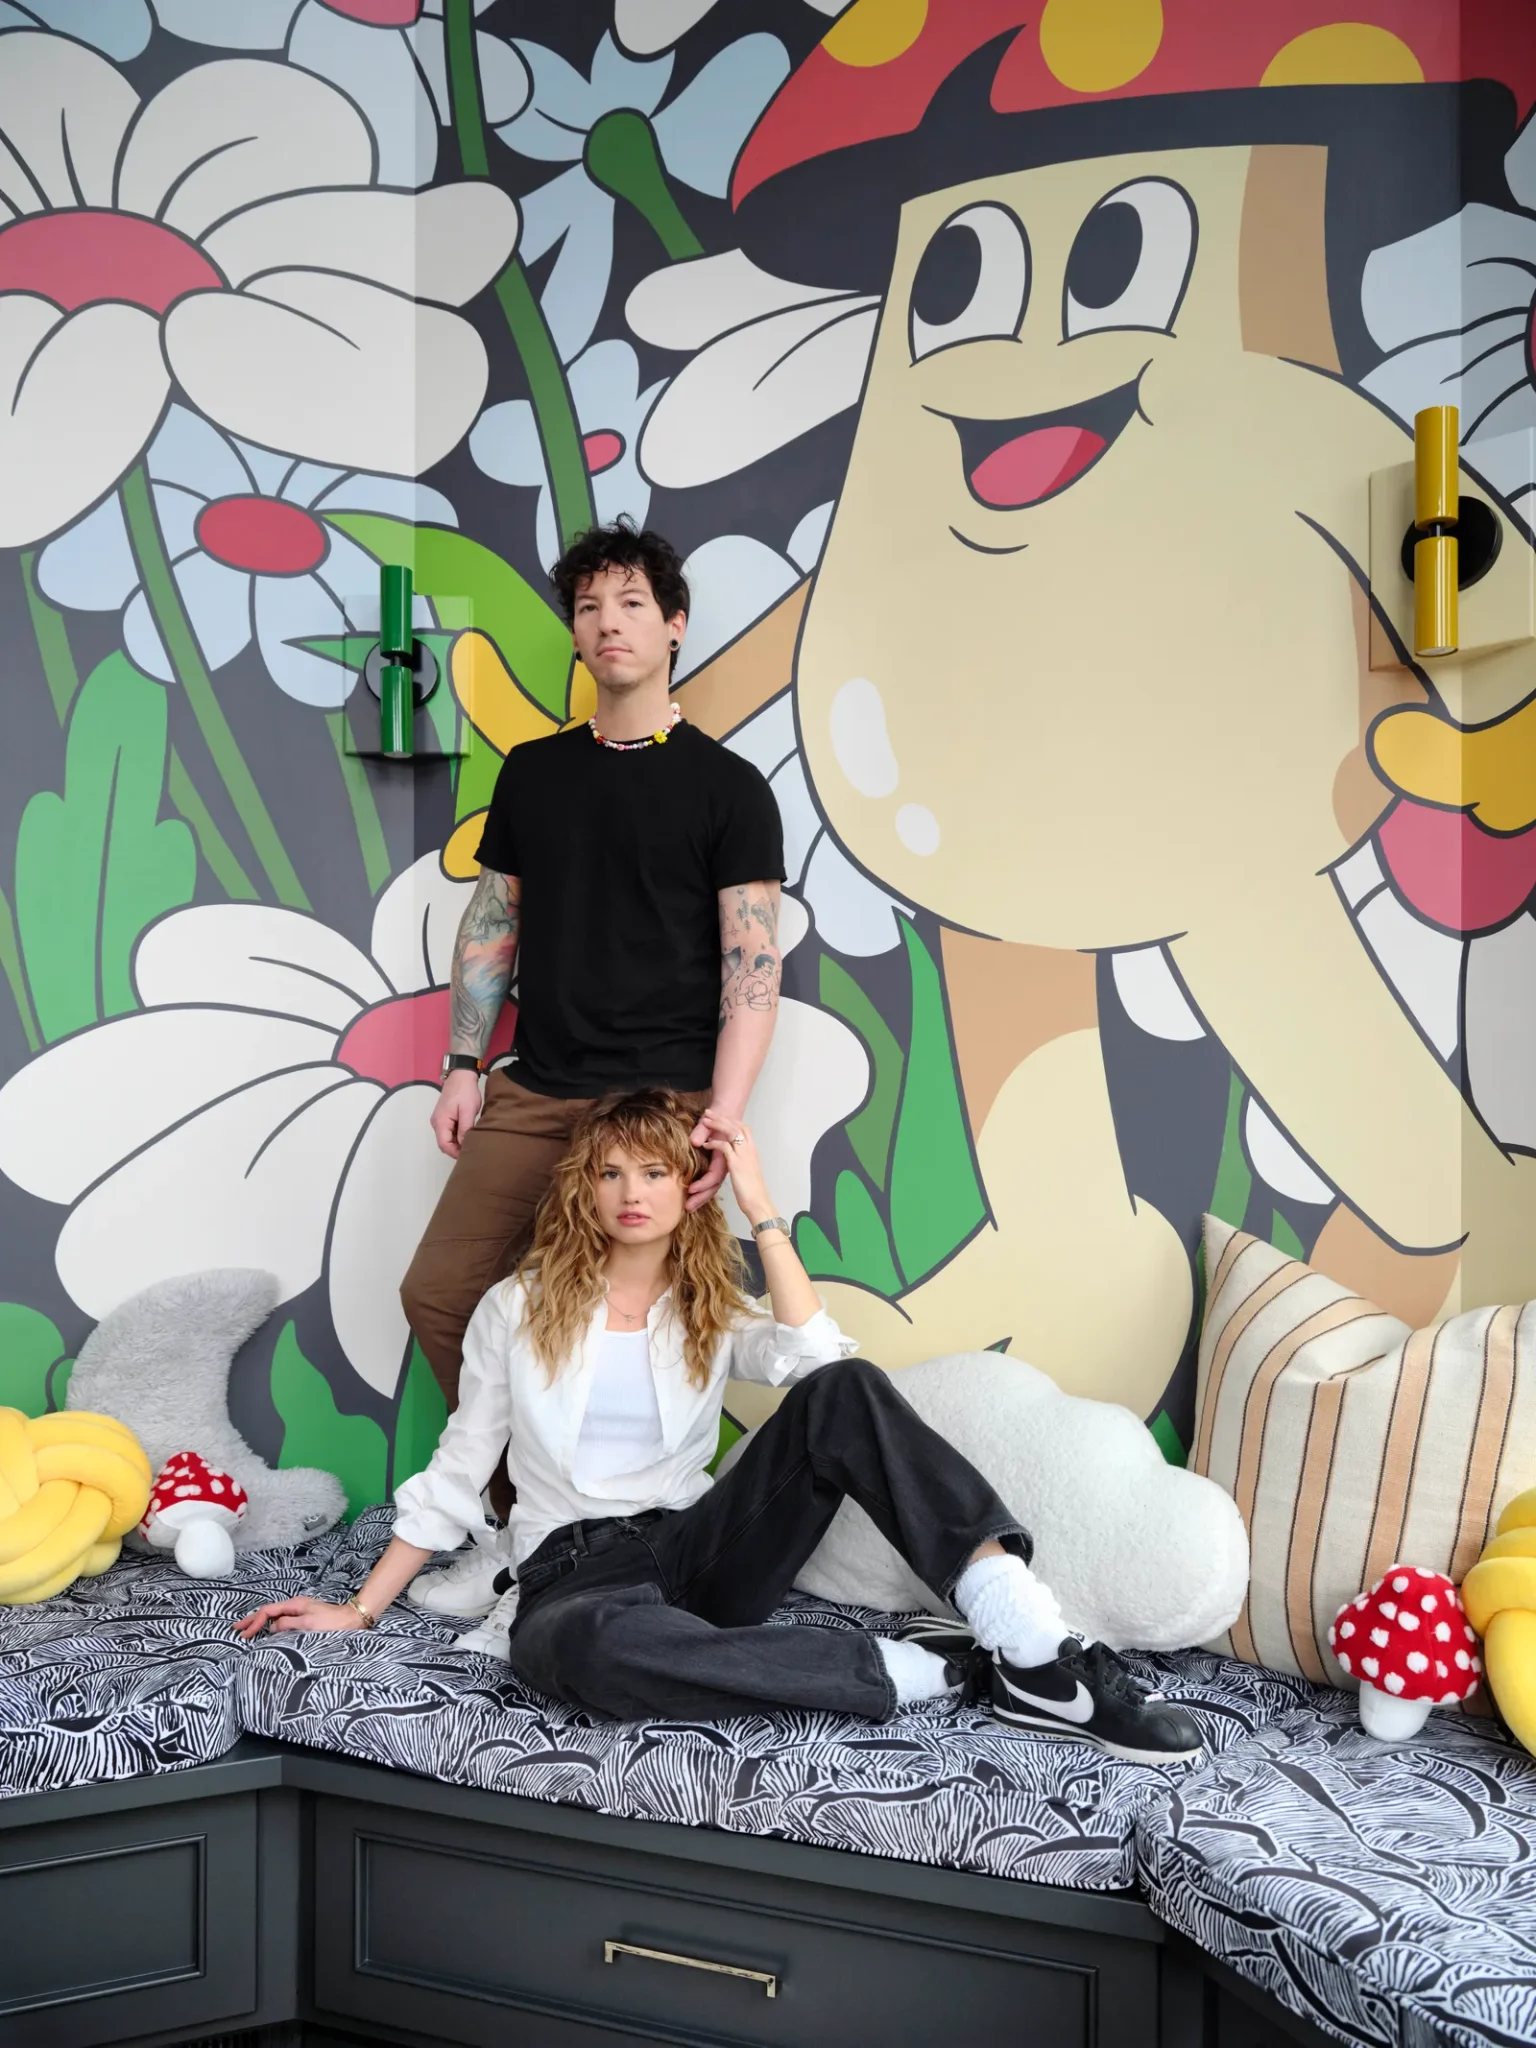 Debby Ryan and Josh dun  in one of their rooms in the fantasy tree house